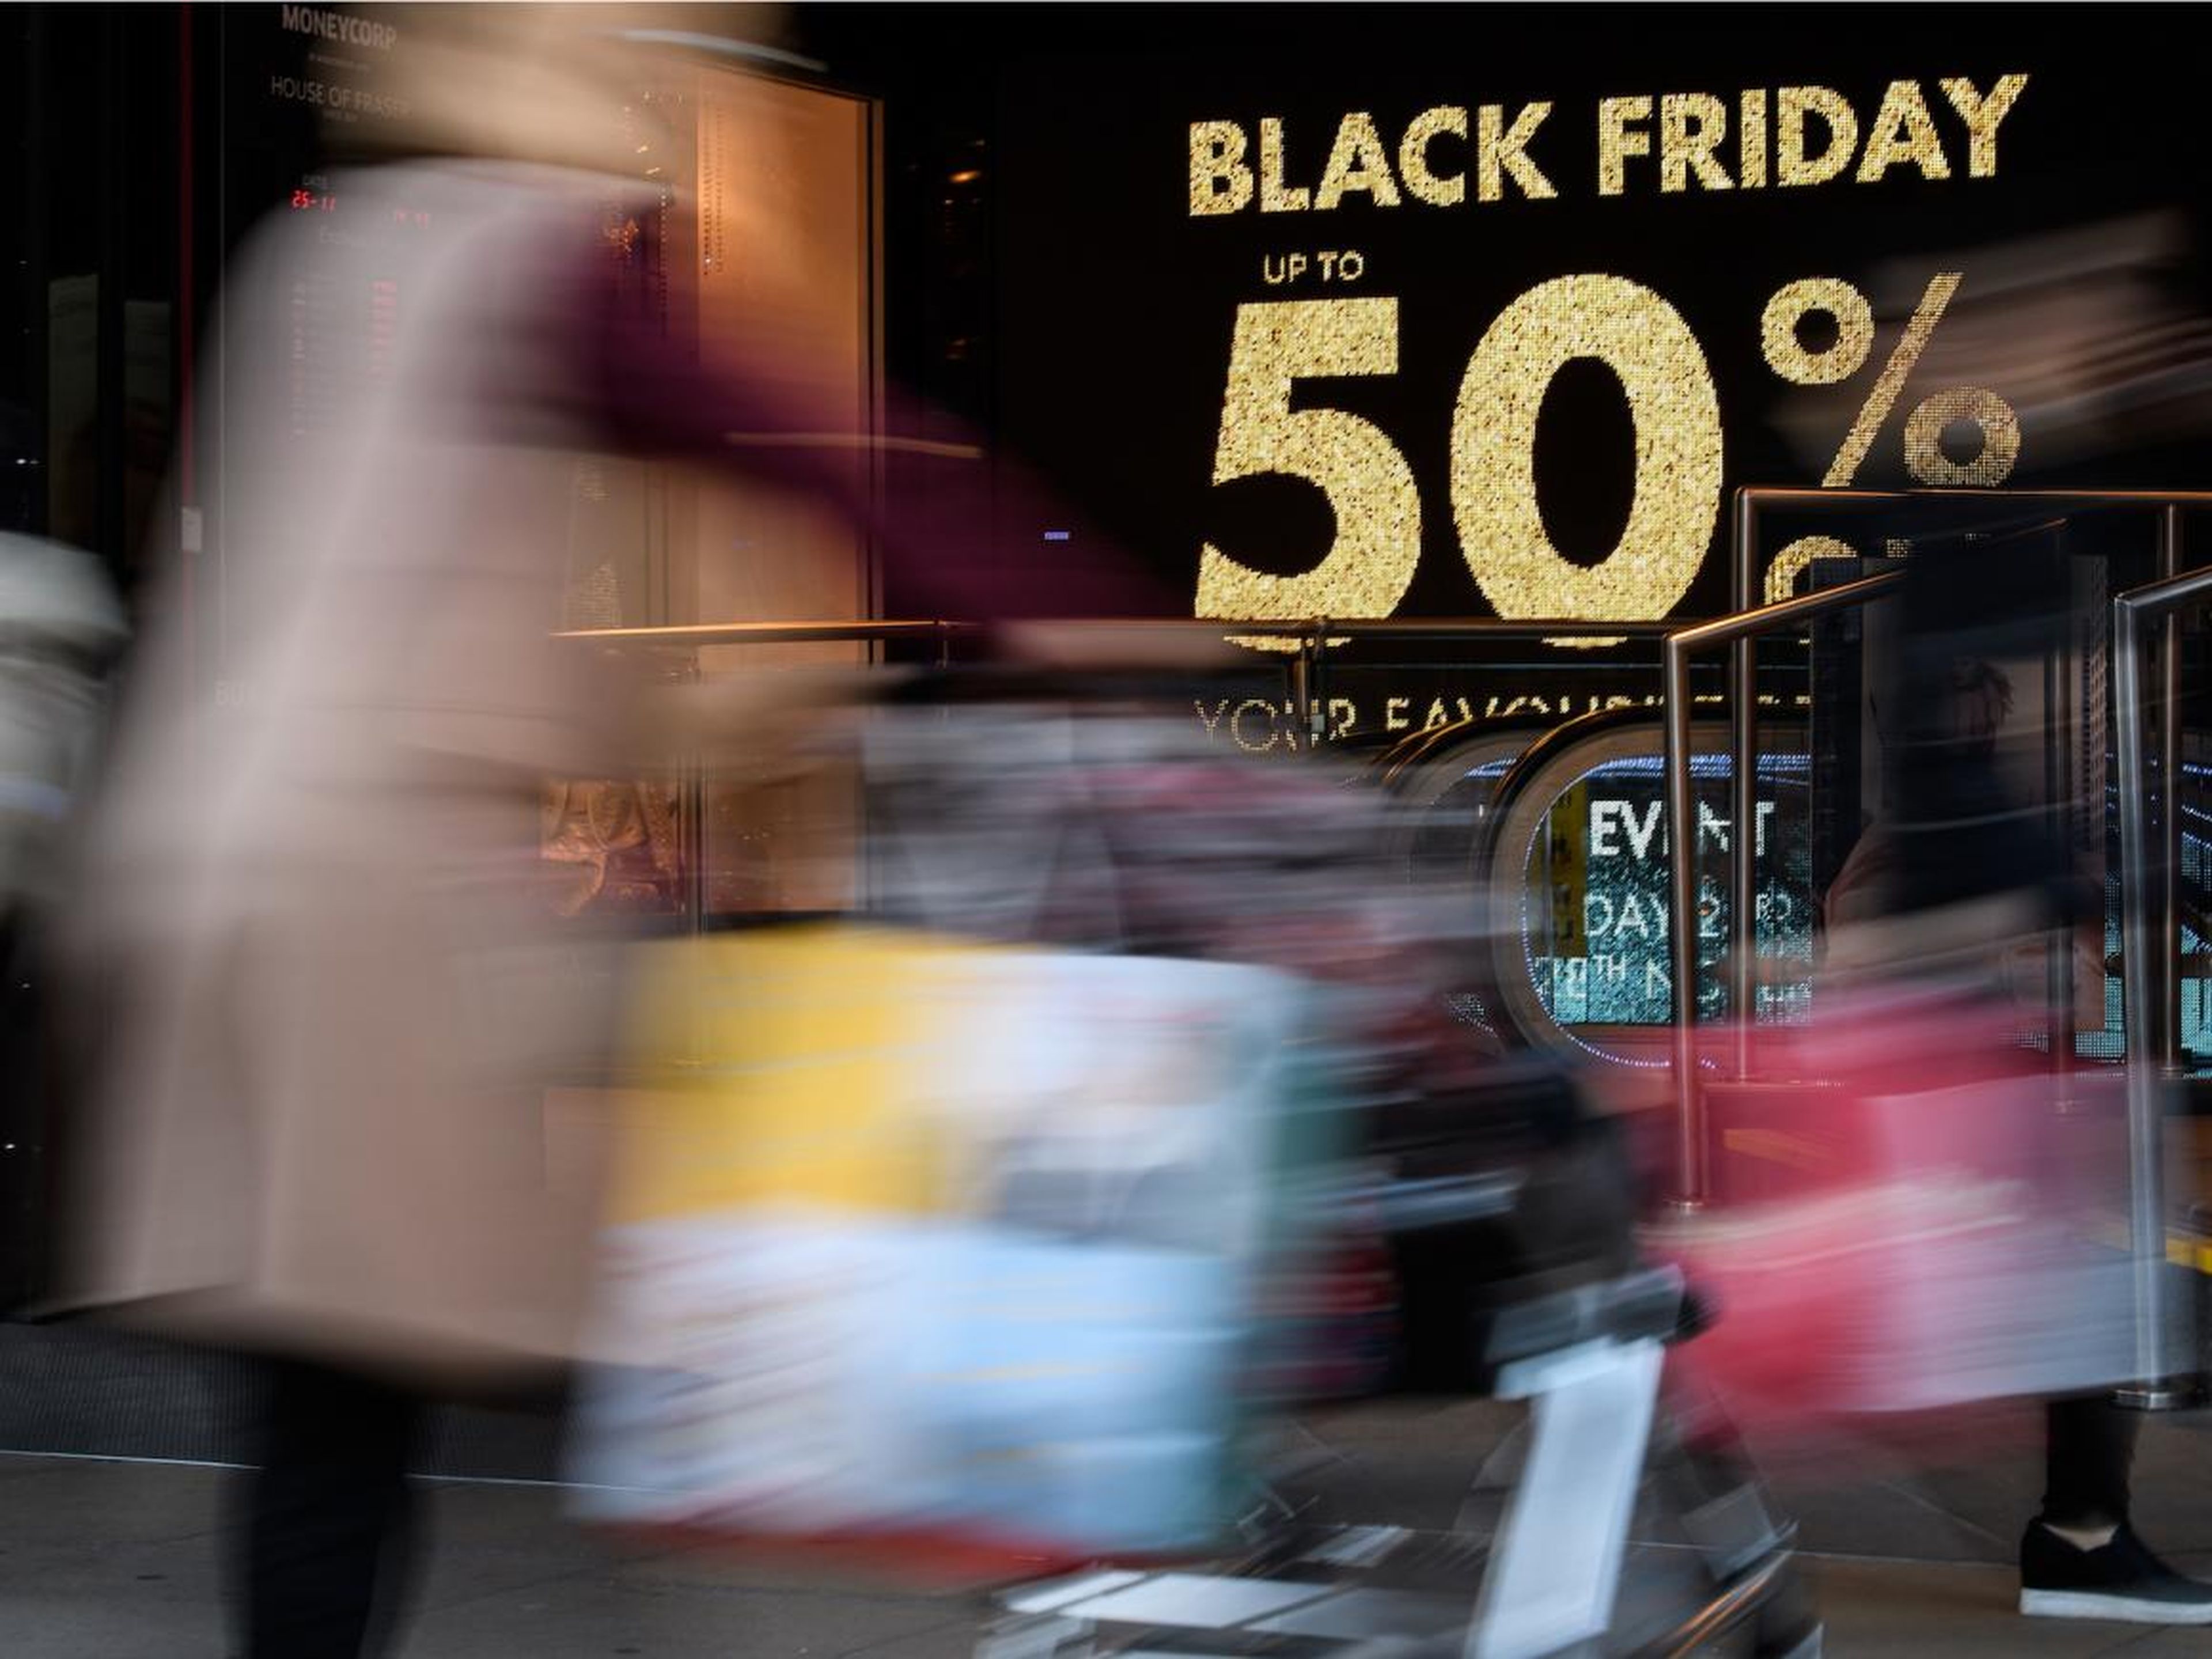 Although in recent years retailers have begun offering deals ahead of Black Friday and competitive discounts online ...